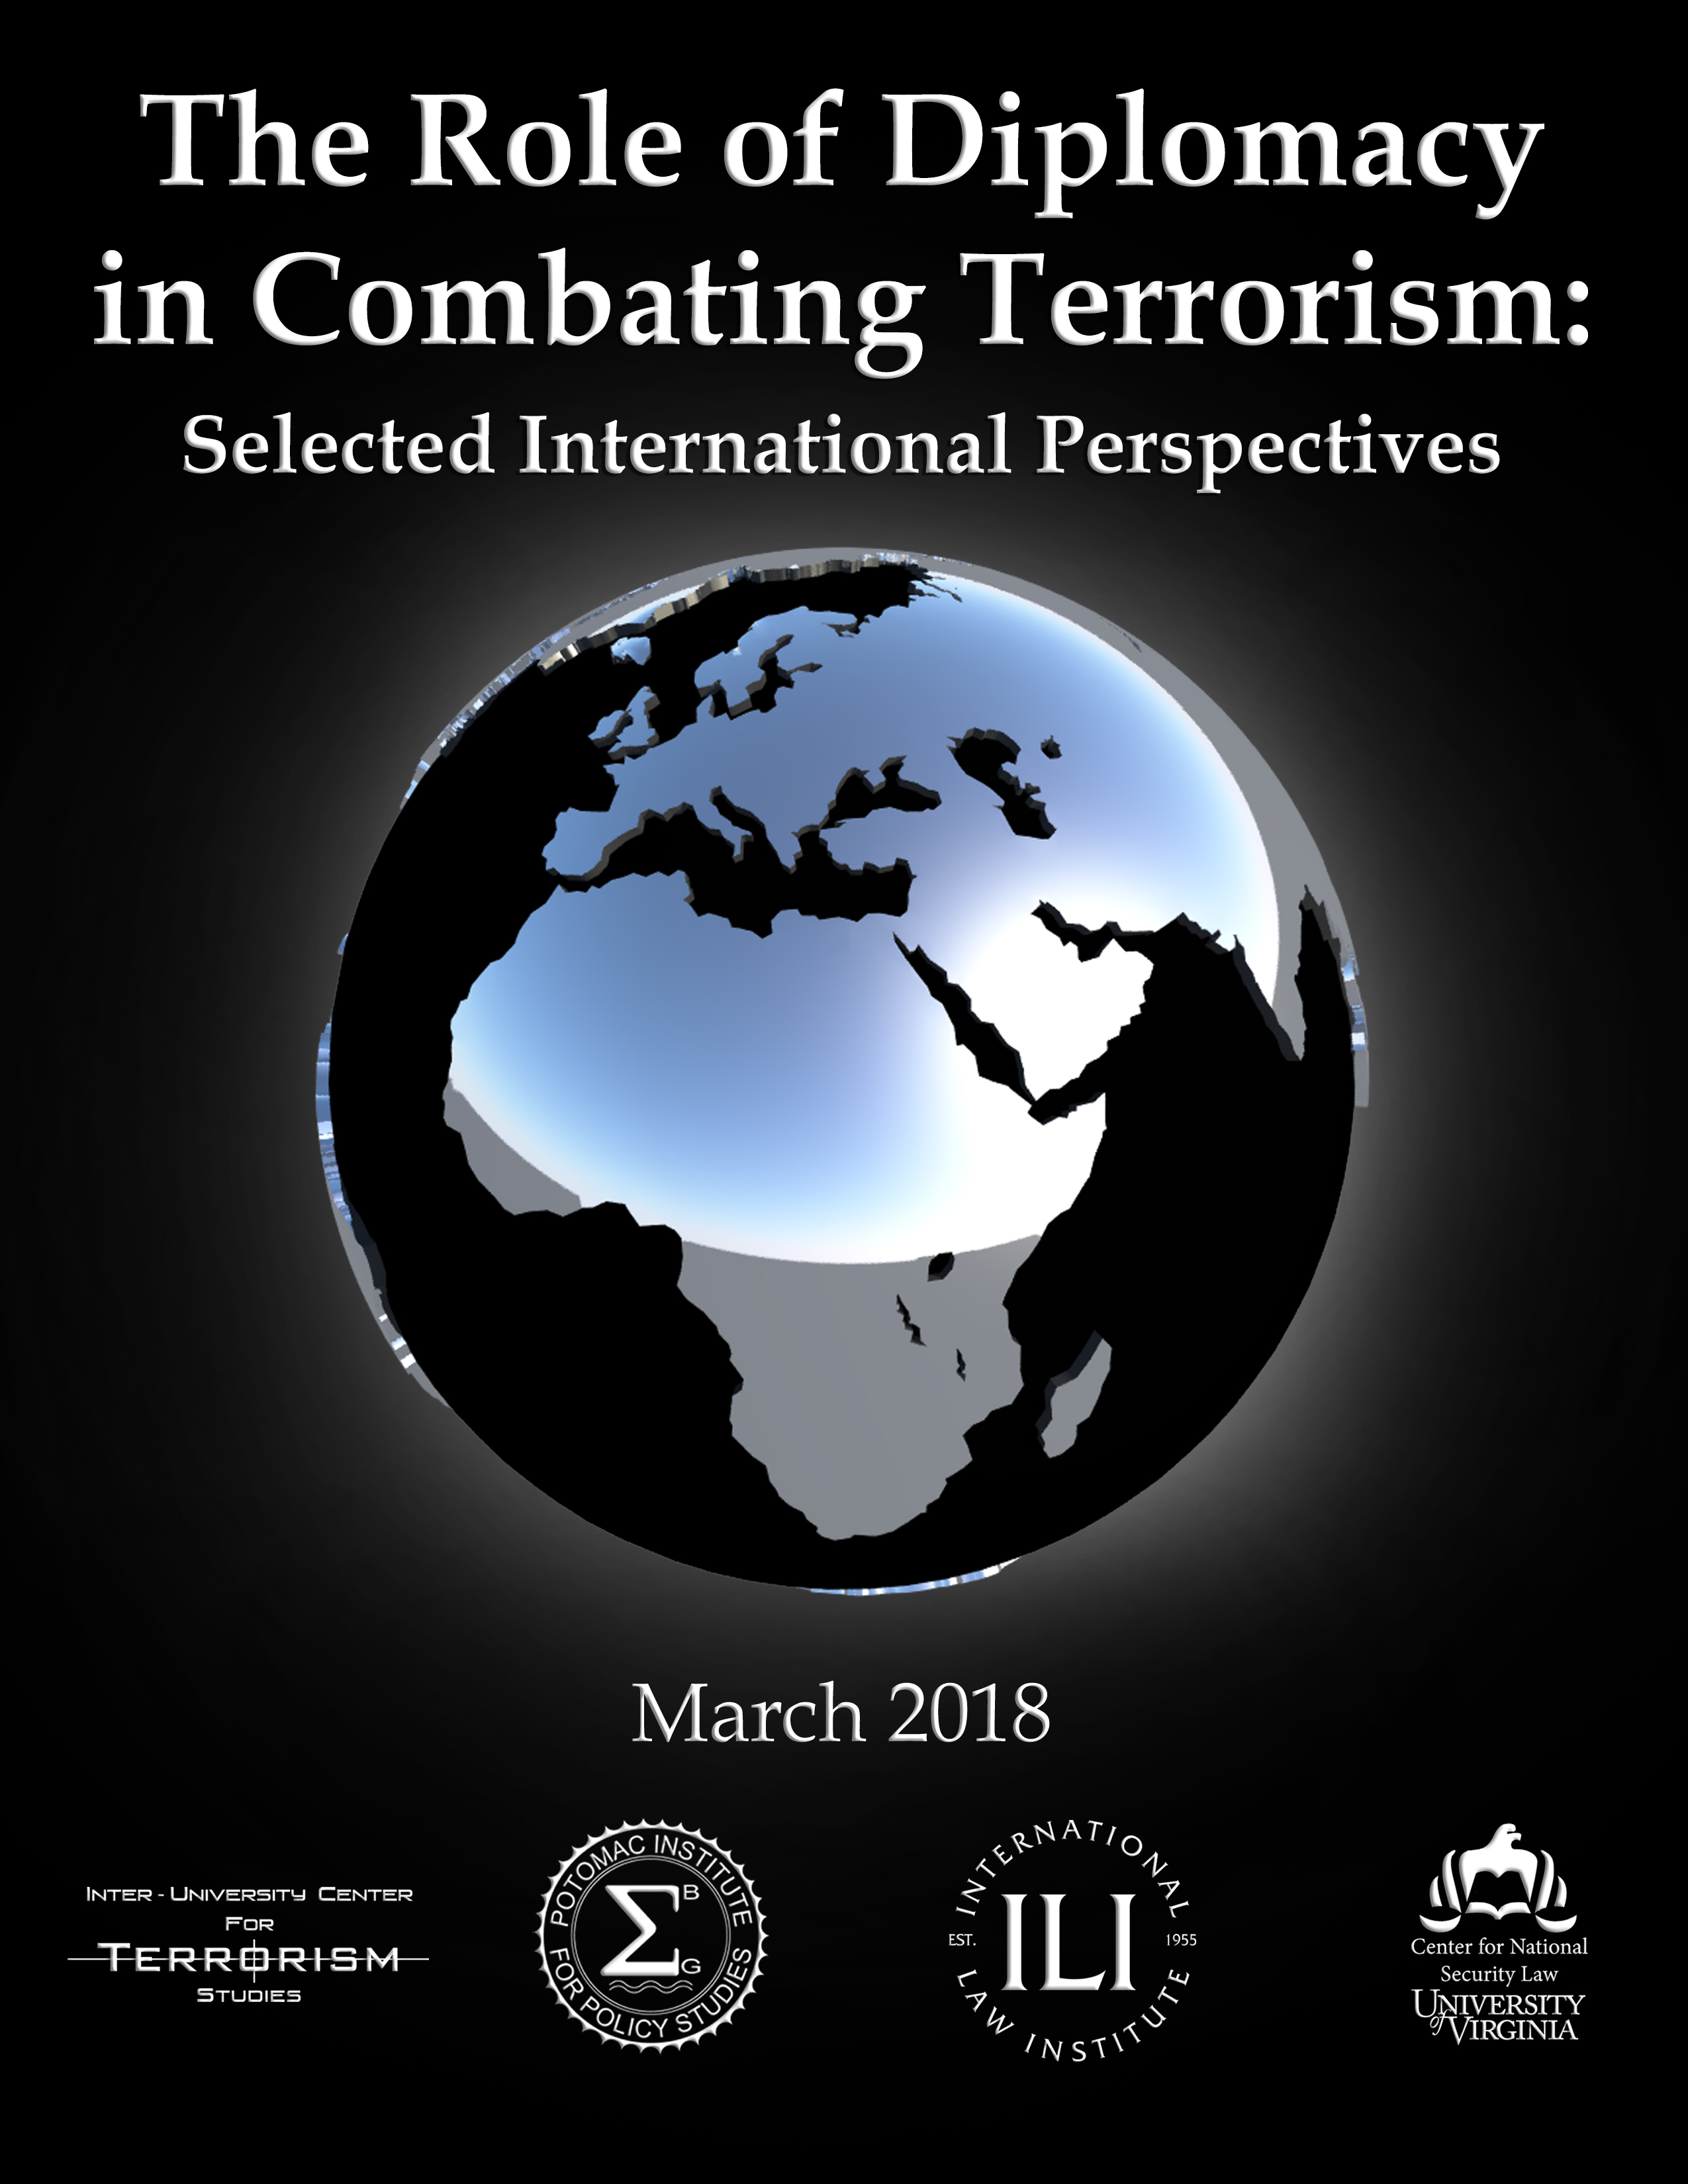 The Role of Diplomacy in Combating Terrorism